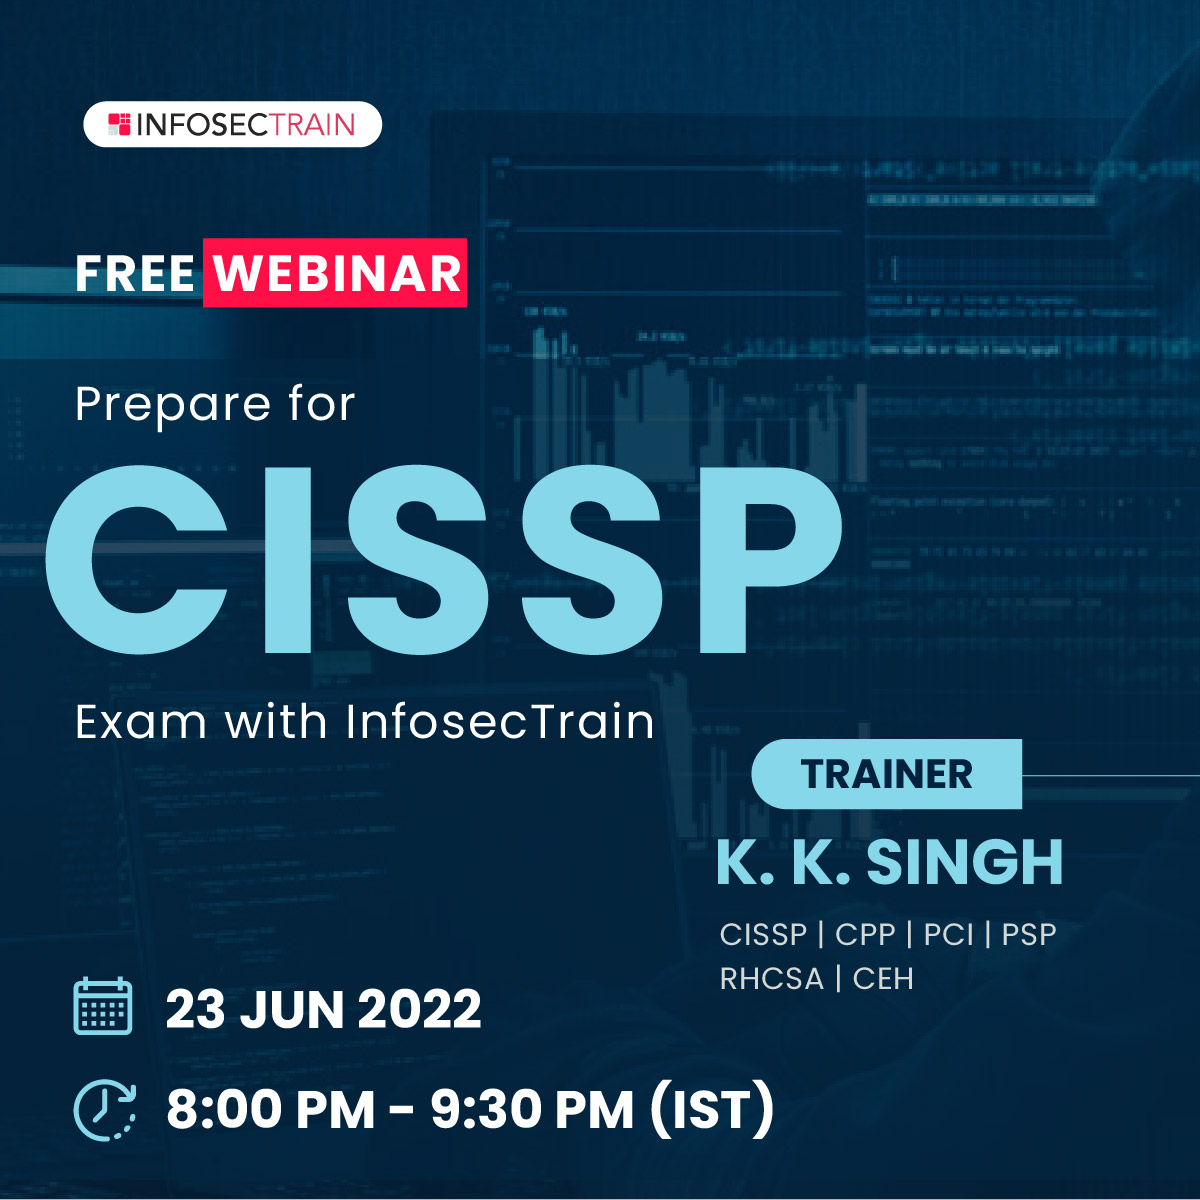 Free webinar on Prepare for CISSP Exam with InfosecTrain, Online Event